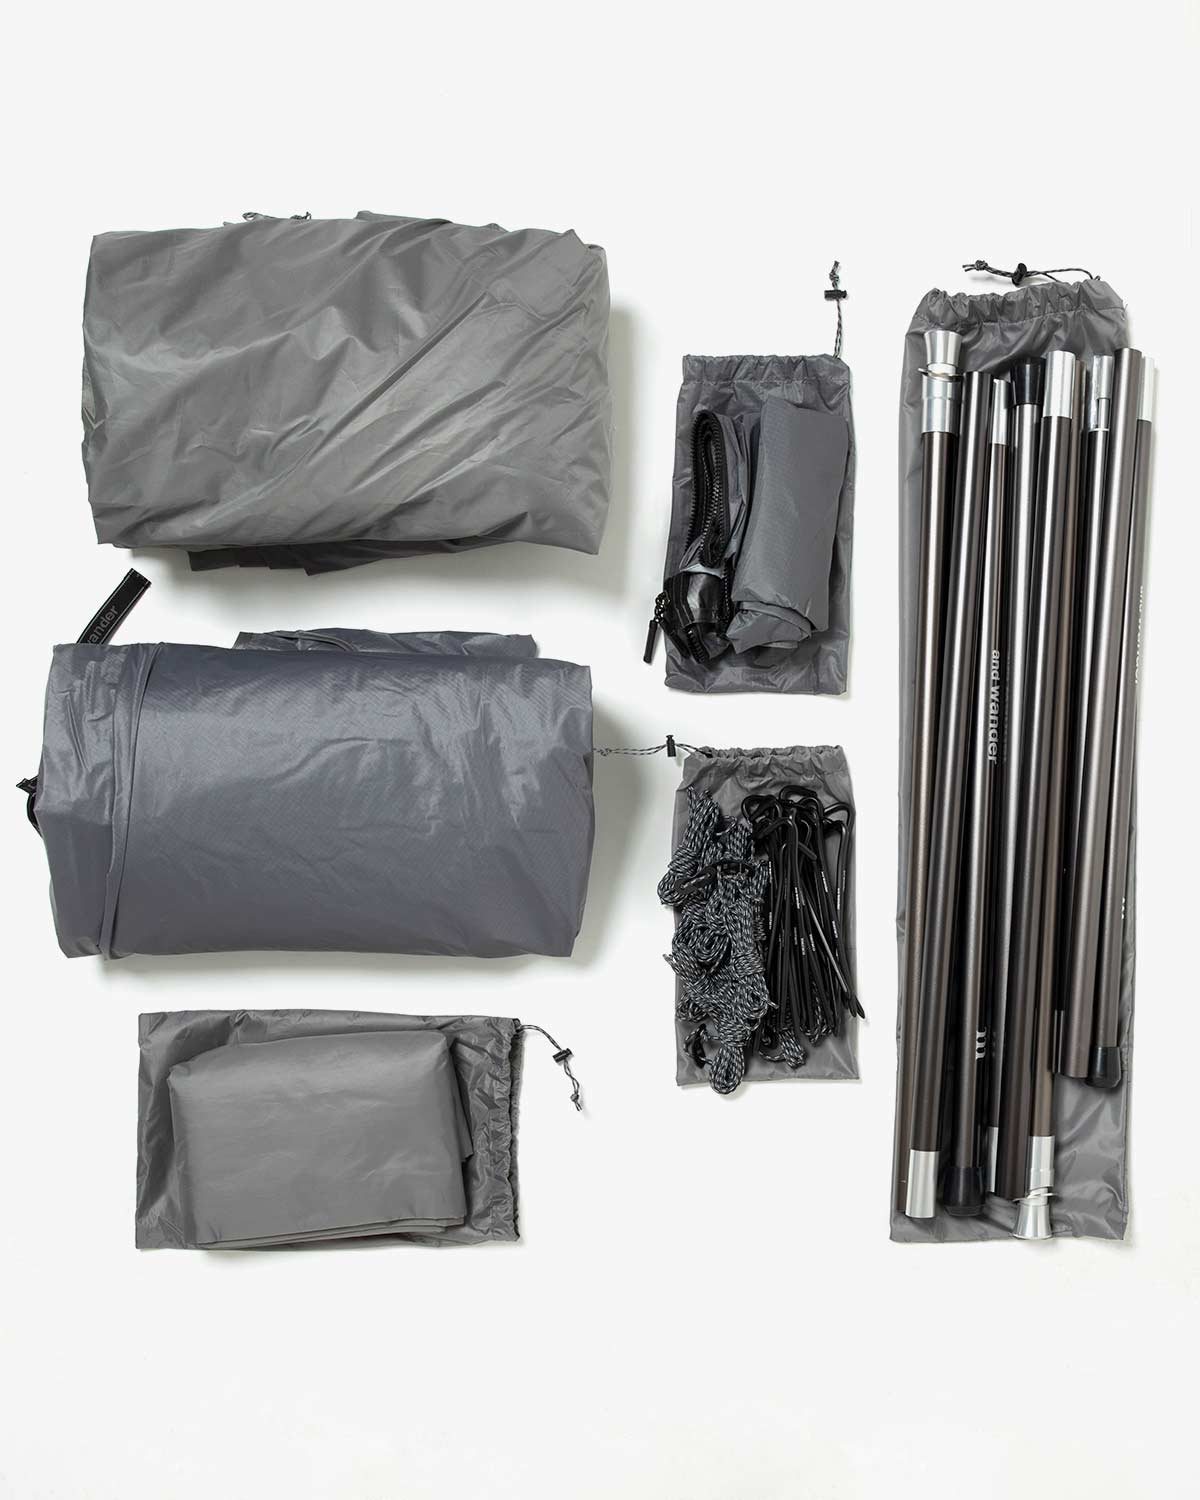 MURACO × AND WANDER HERON 2POLE TENT SHELTER SET